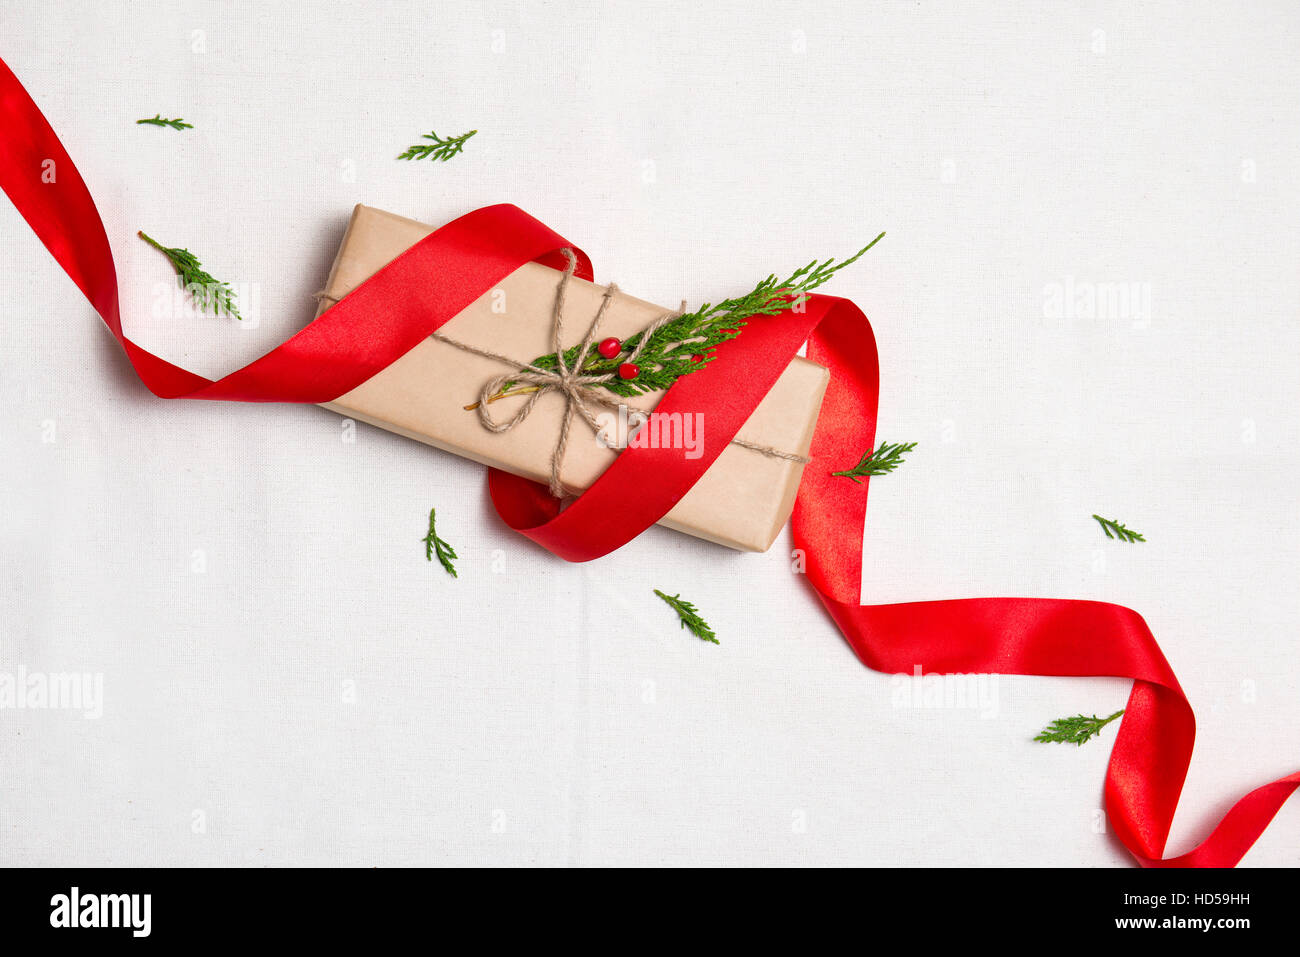 Christmas presents. Hand crafted xmas gift on table. Stock Photo